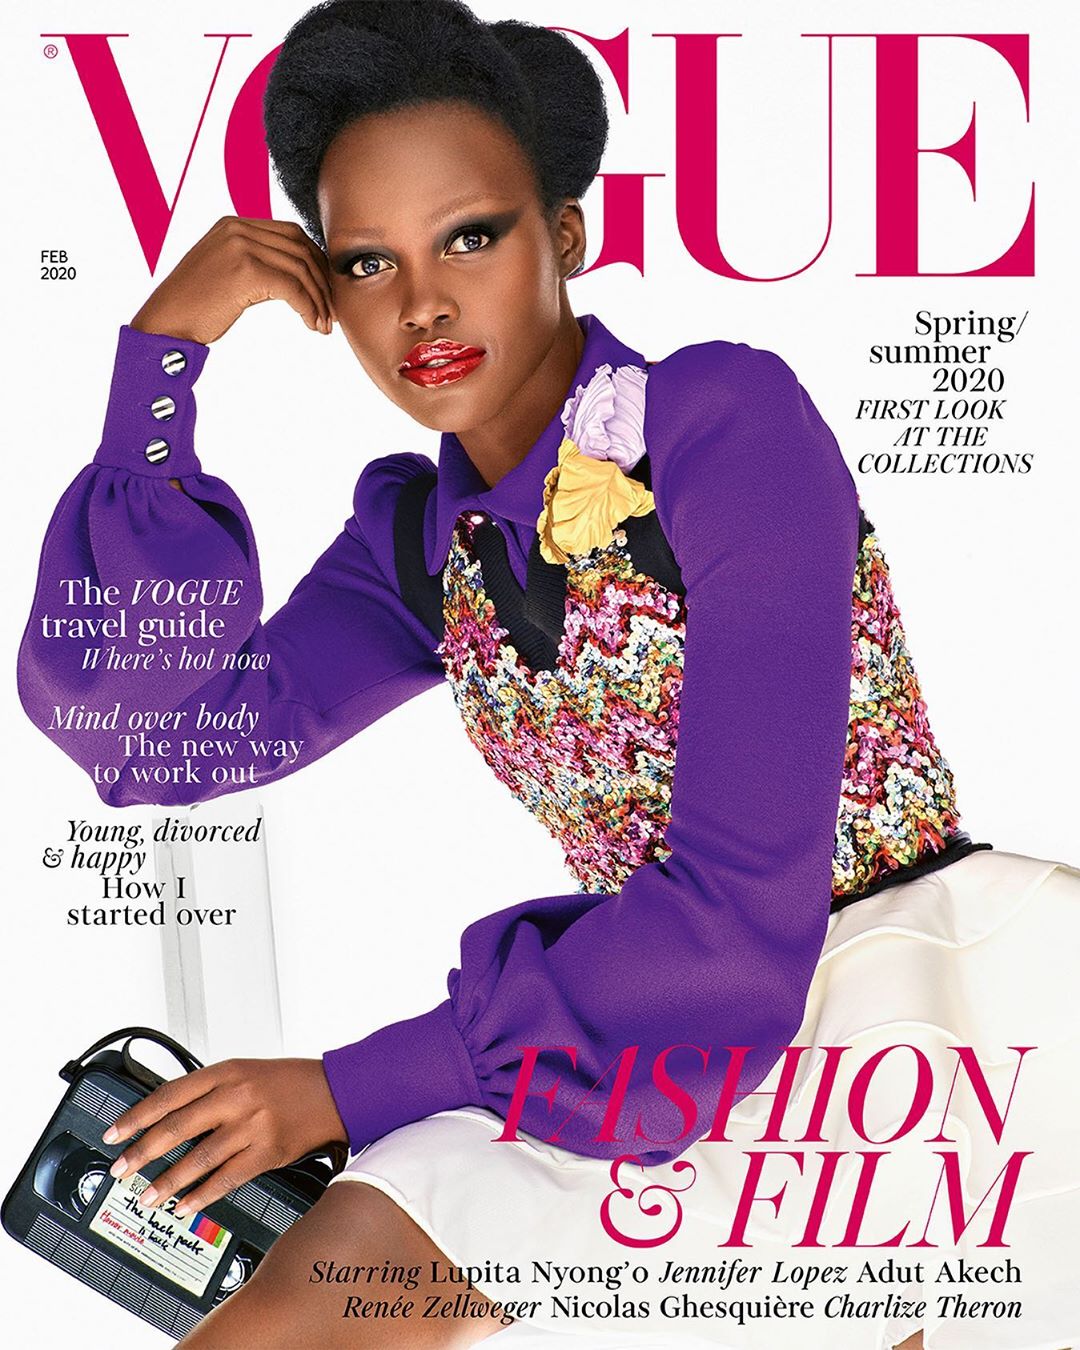 3-revelations-by-lupita-nyongo-as-she-lands-her-first-british-vogue-cover